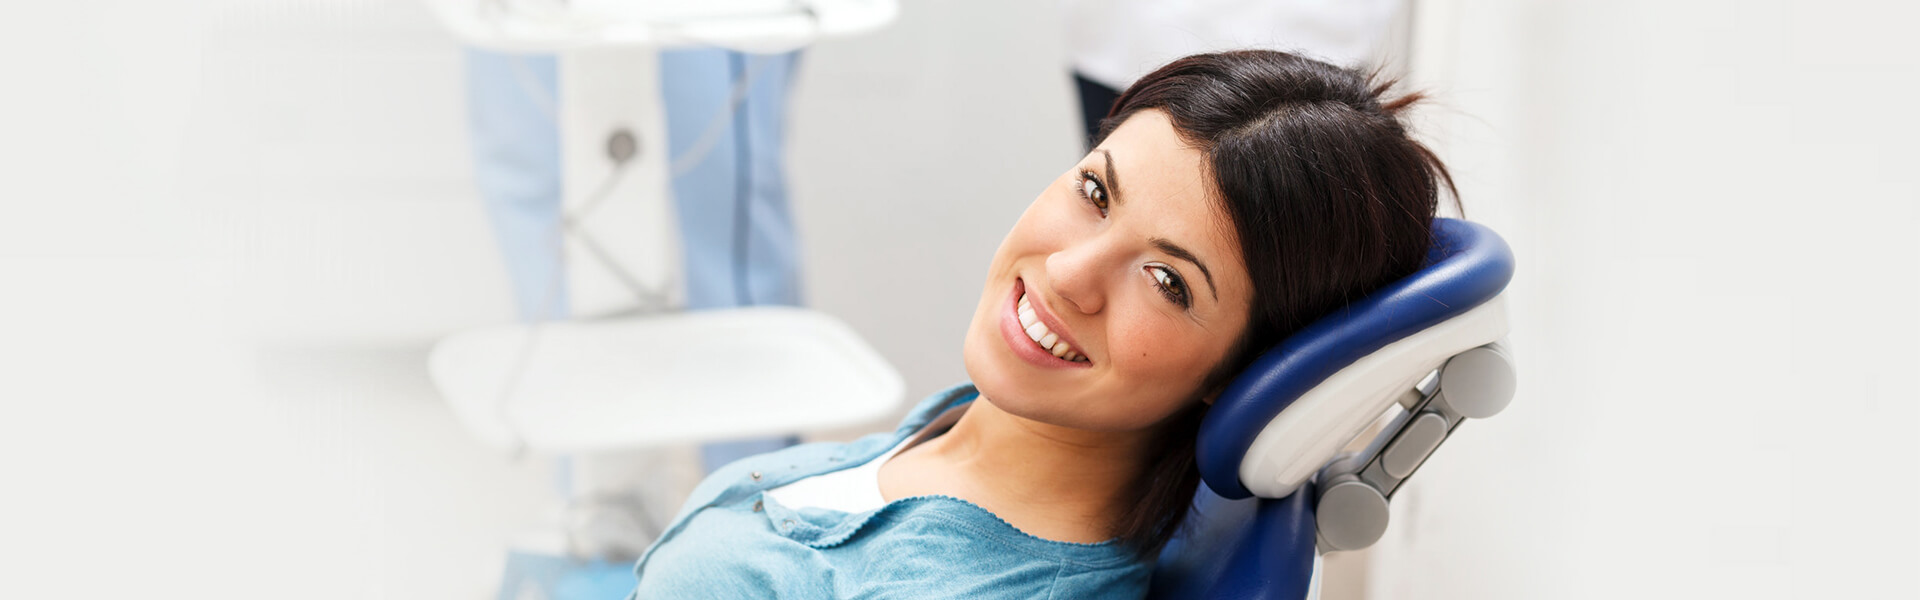 Endodontics in Mississauga, ON | Root Canal Treatment Near You